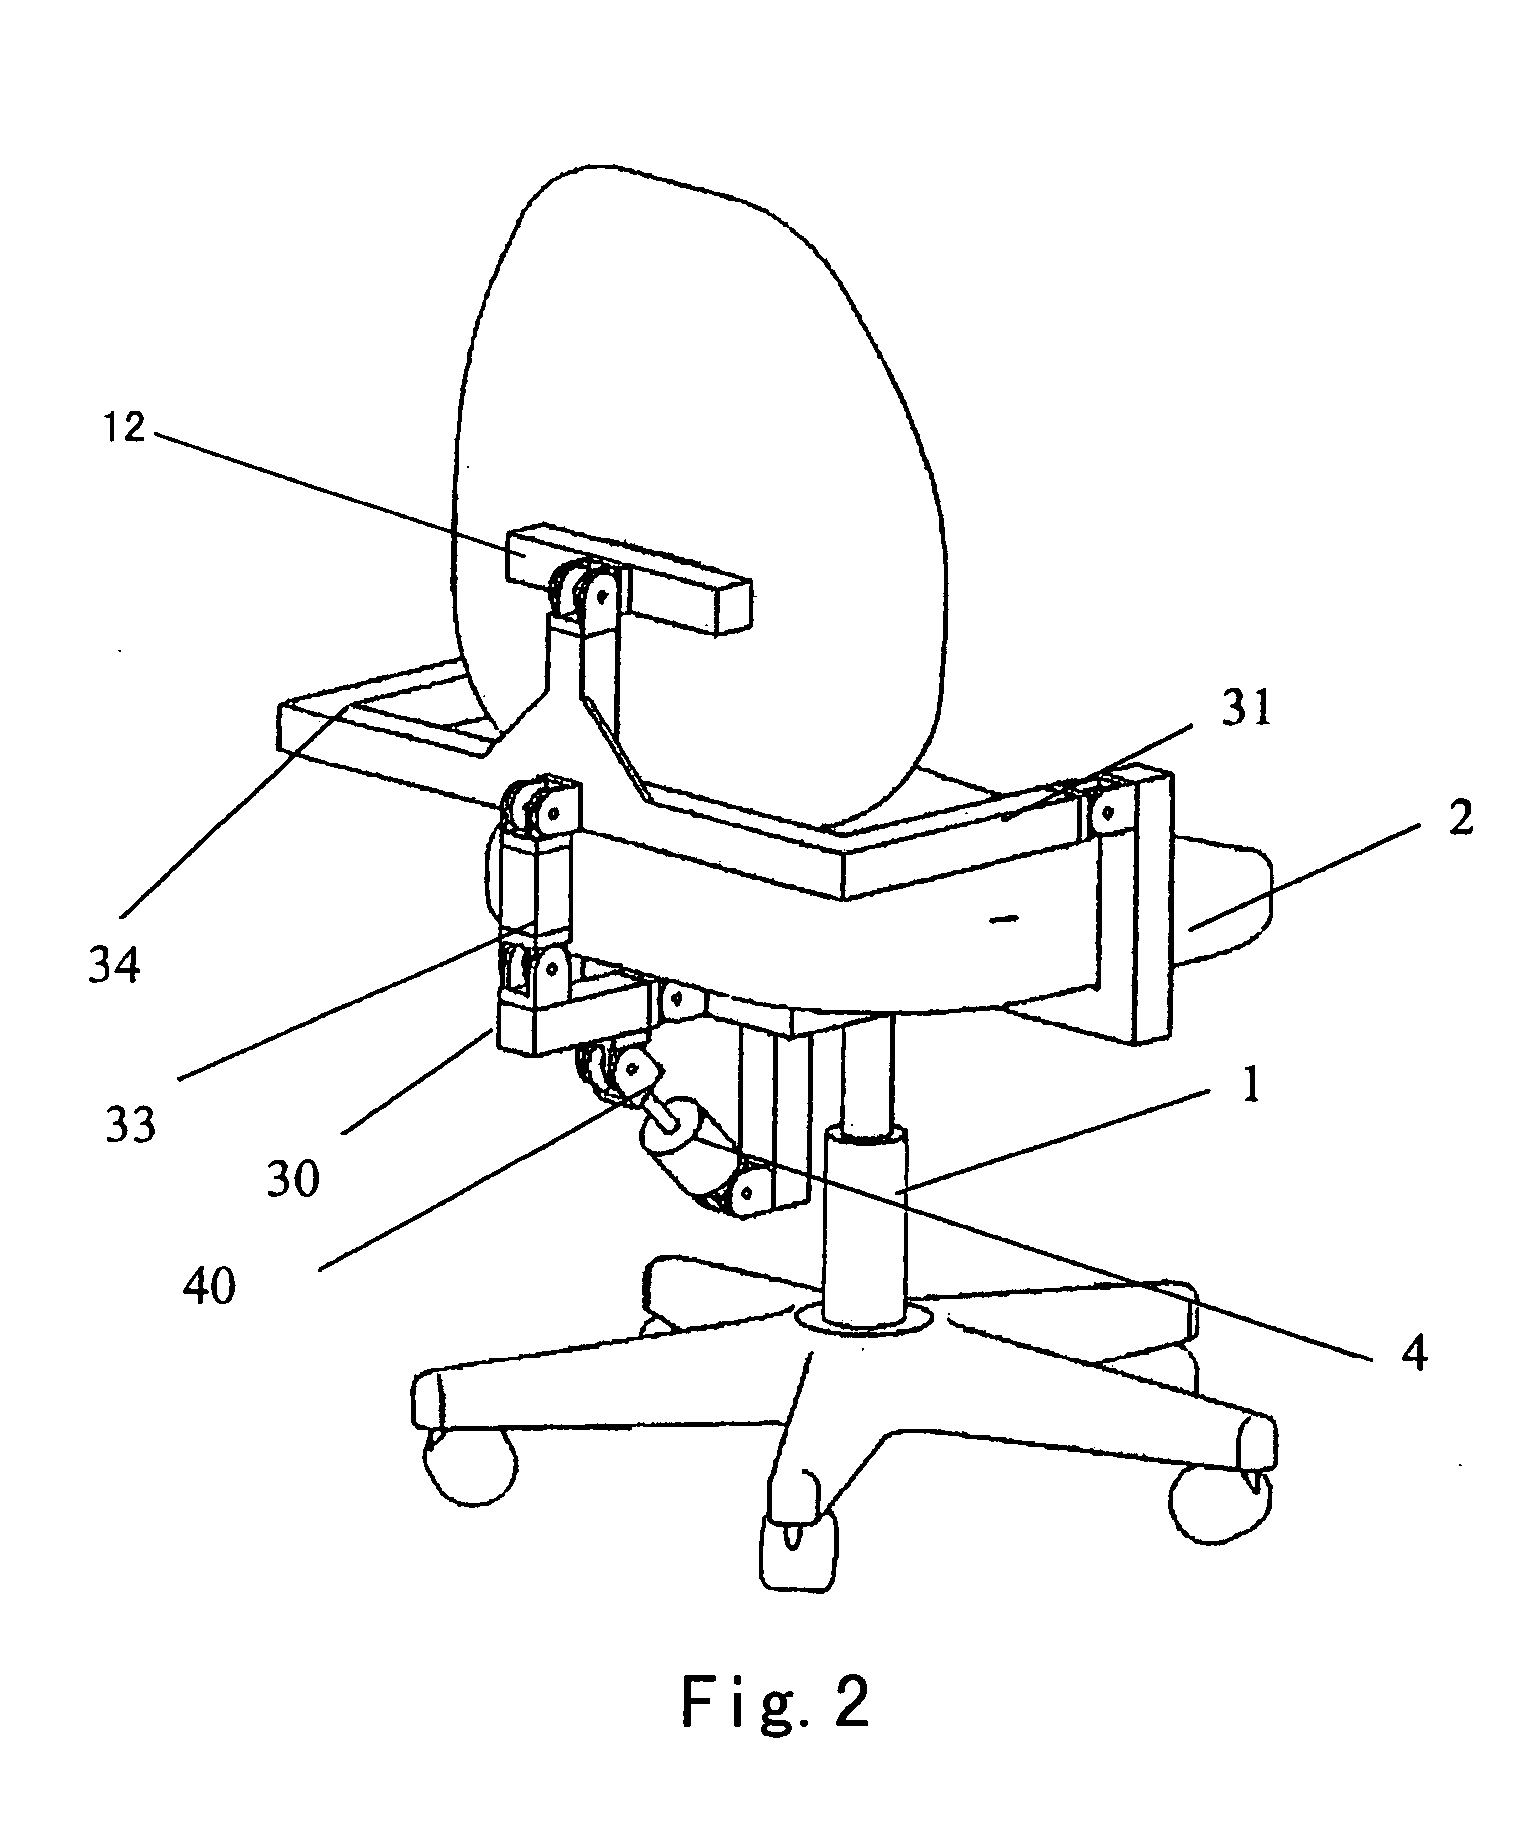 Chair with a synchronous coordinating system for the chair back